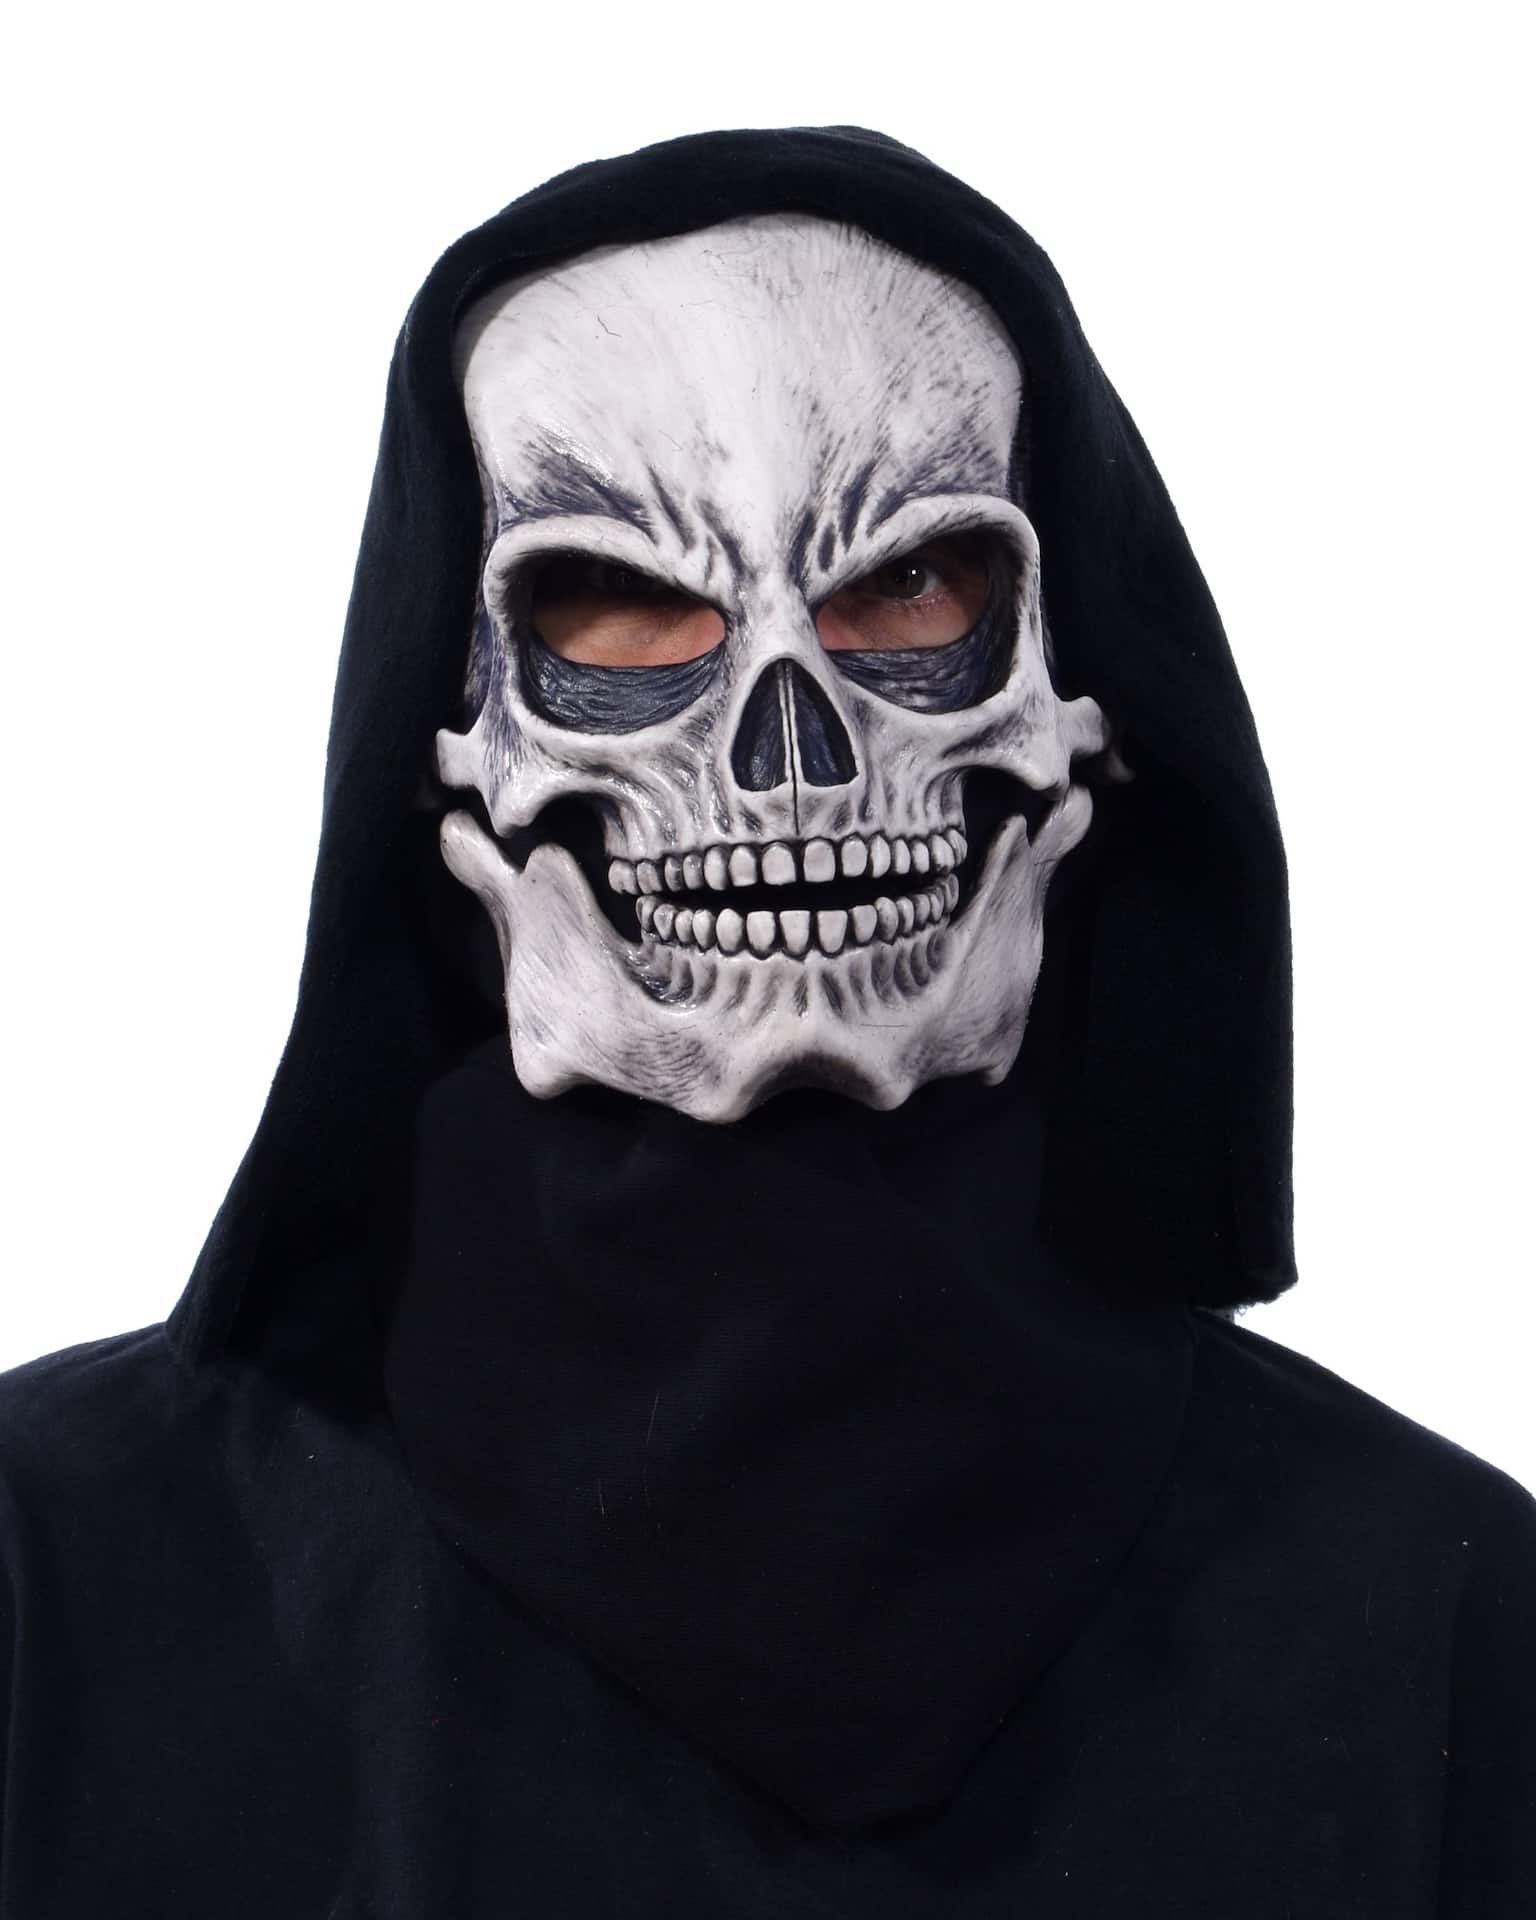 Grim Reaper Skull Latex Mask, White/Black, One Size, Wearable Costume  Accessory for Halloween